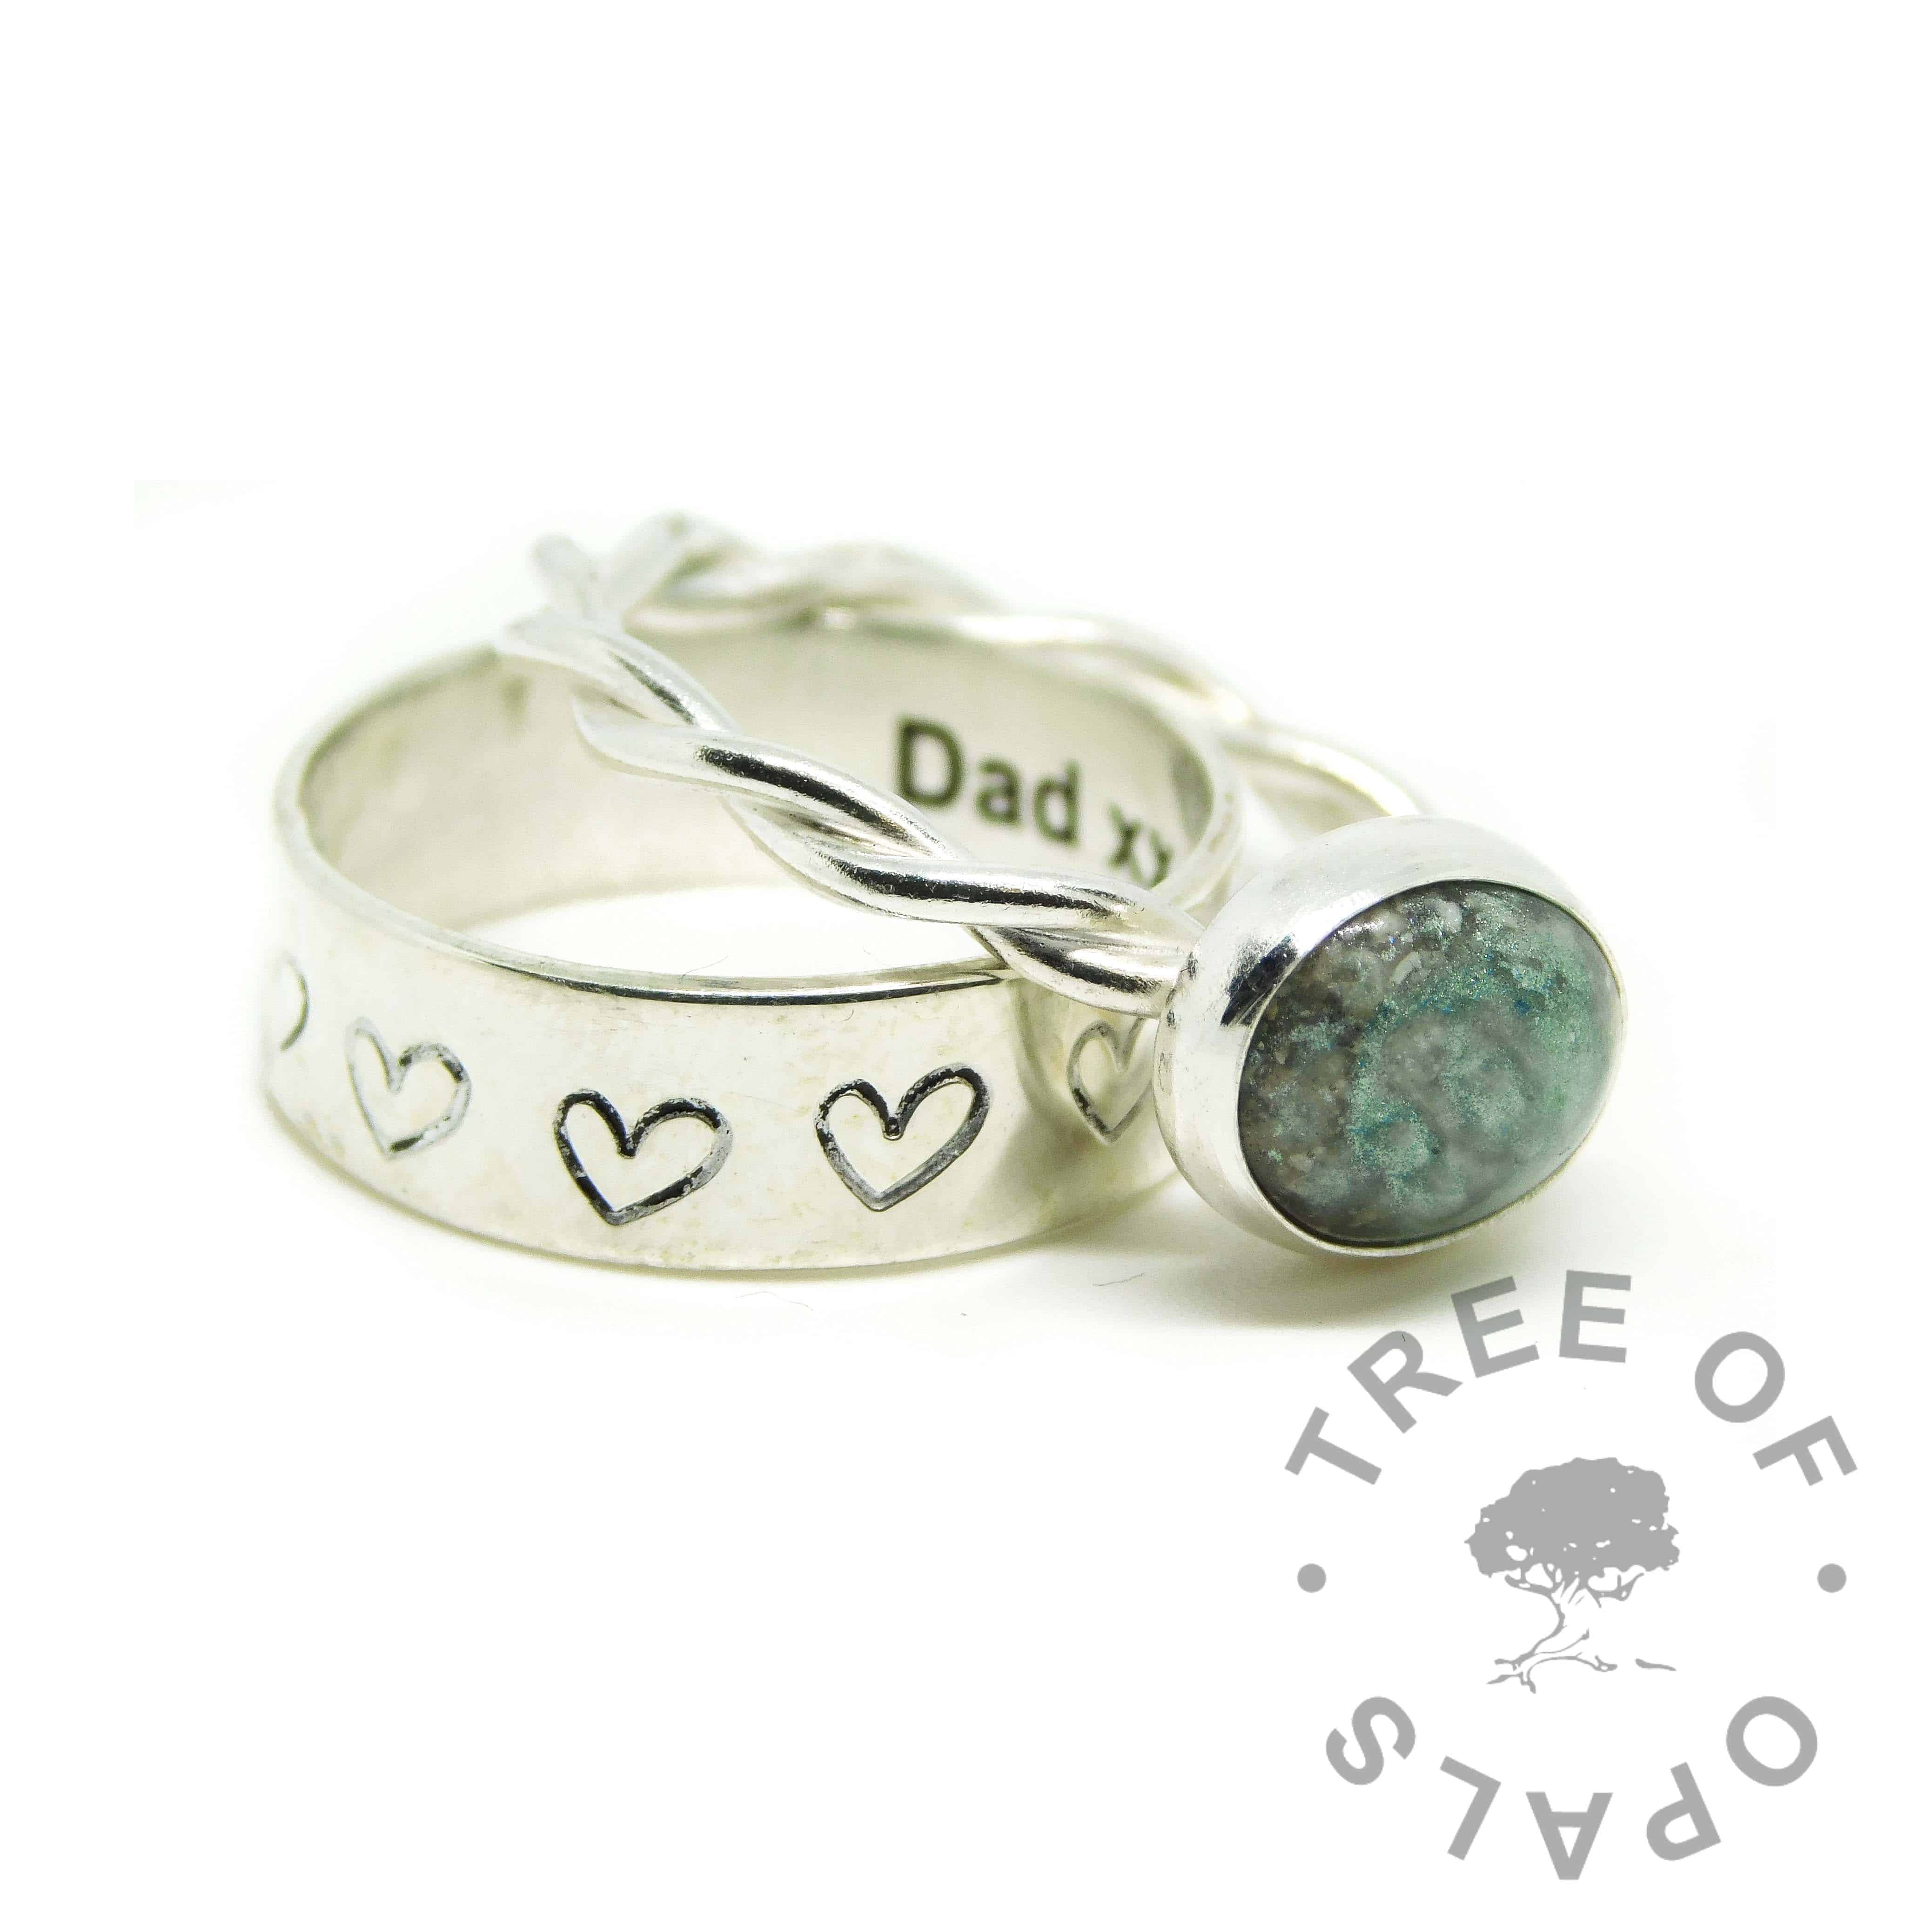 aqua ashes ring, cremation ashes ring on twisted band. Angelic aqua resin sparkle mix. Shown with a heart handstamped 6mm band stacking ring, engraved Dad xx inside